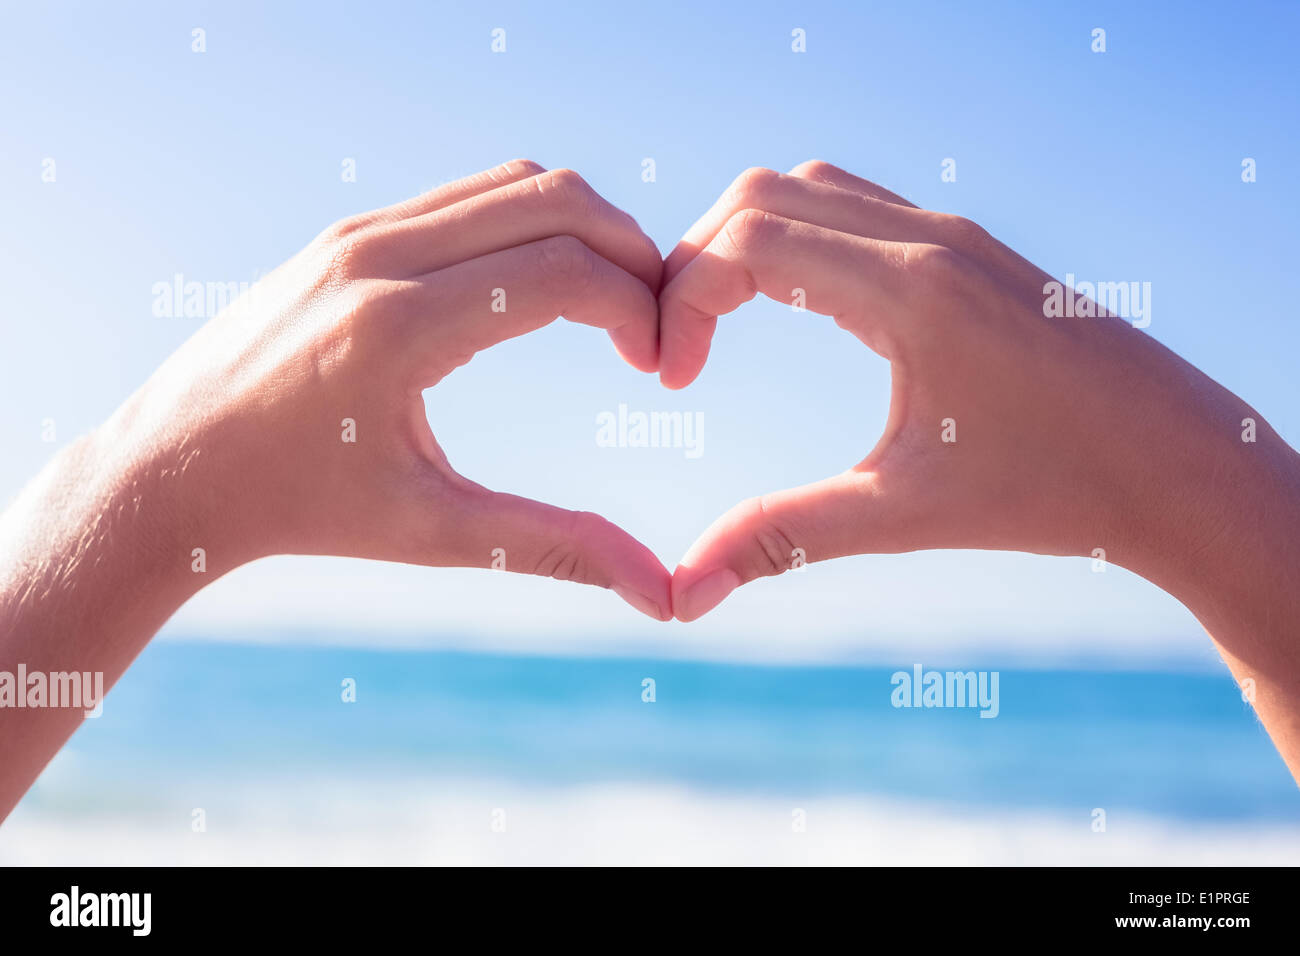 Hands making heart shape on the beach Stock Photo